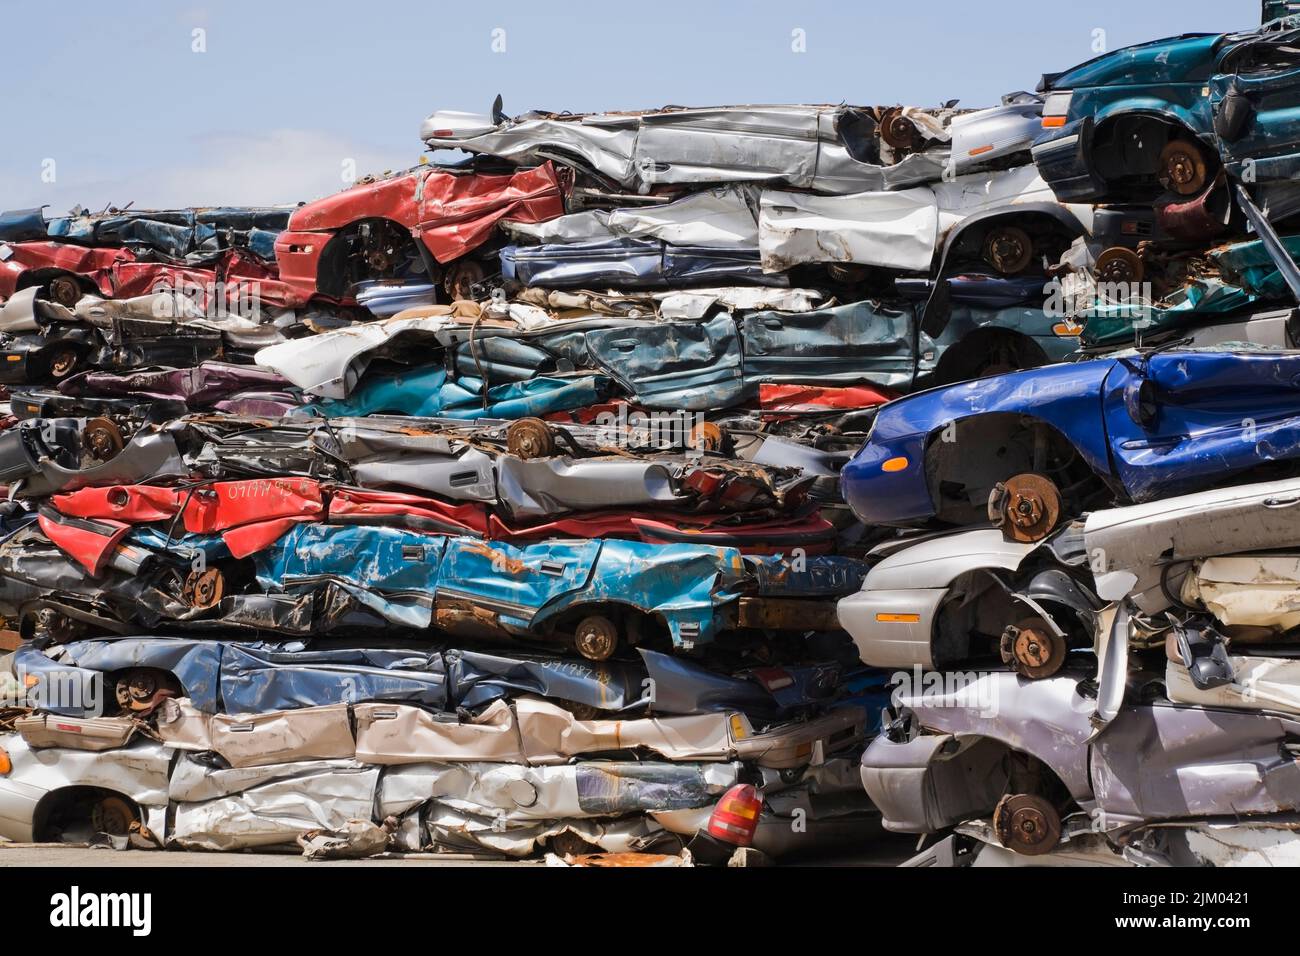 Stacked and crushed discarded automobiles at scrap metal recycling yard. Stock Photo